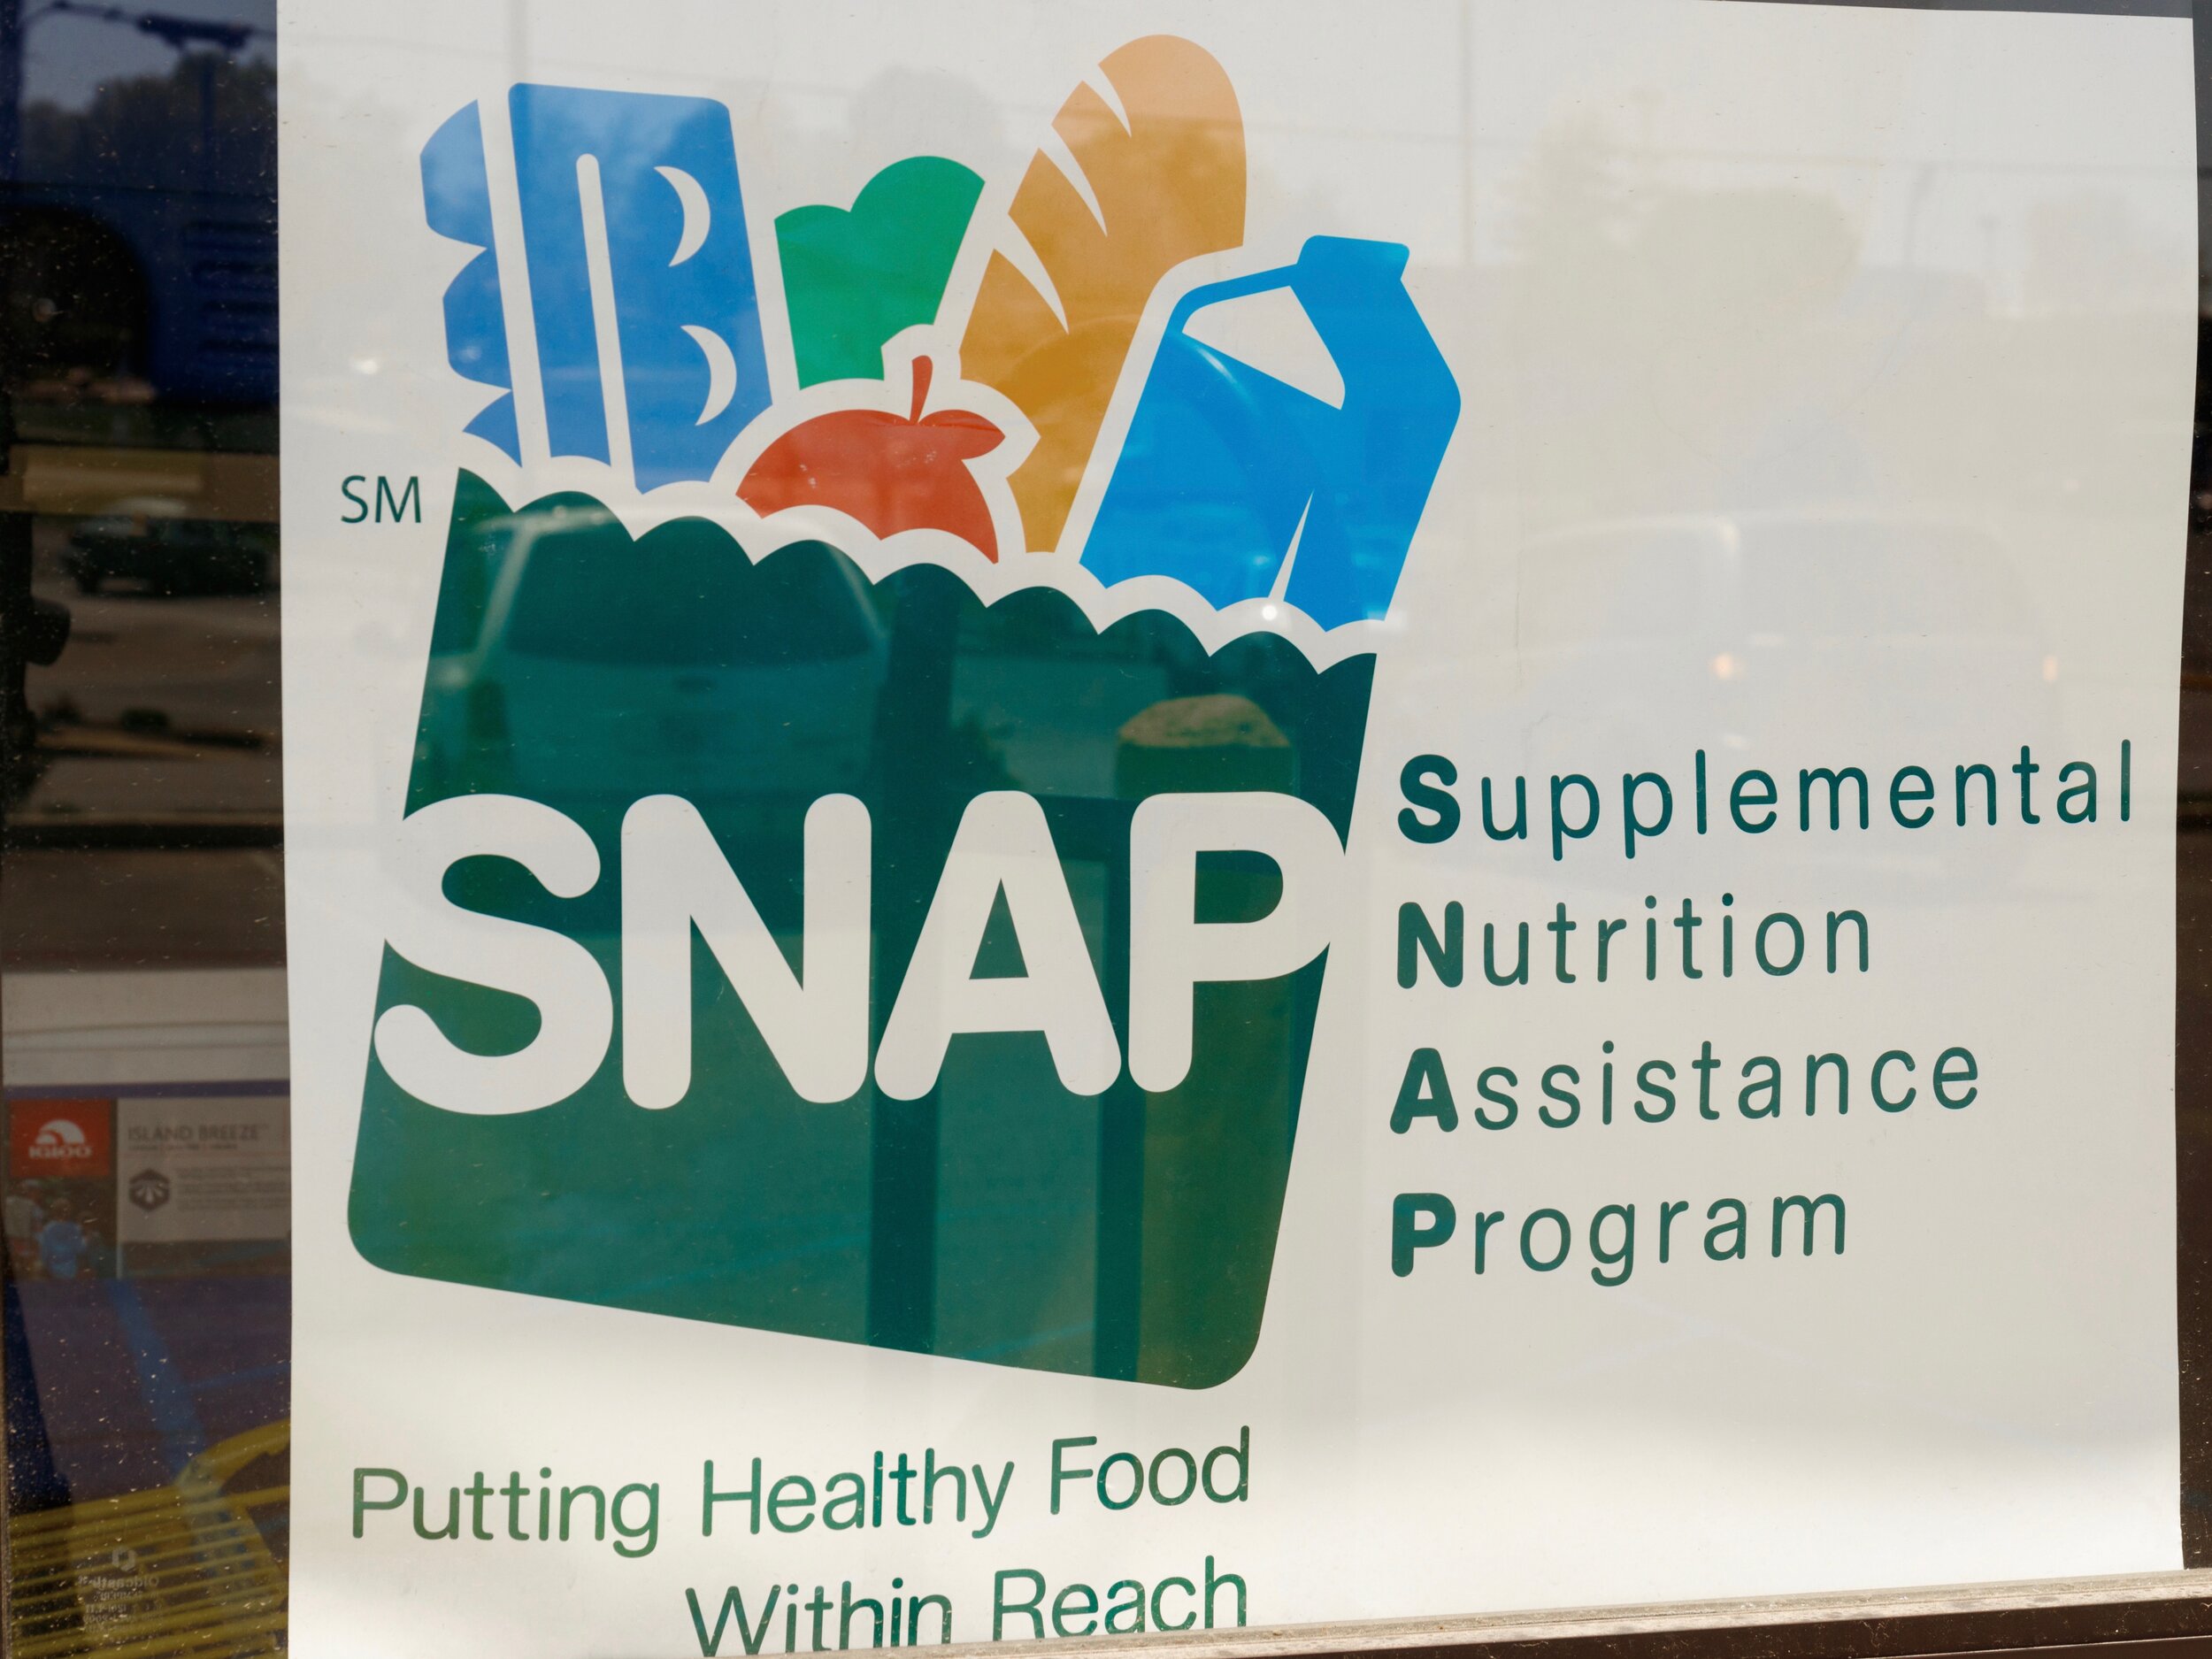 Work requirement for food stamps draws flak â 1IL